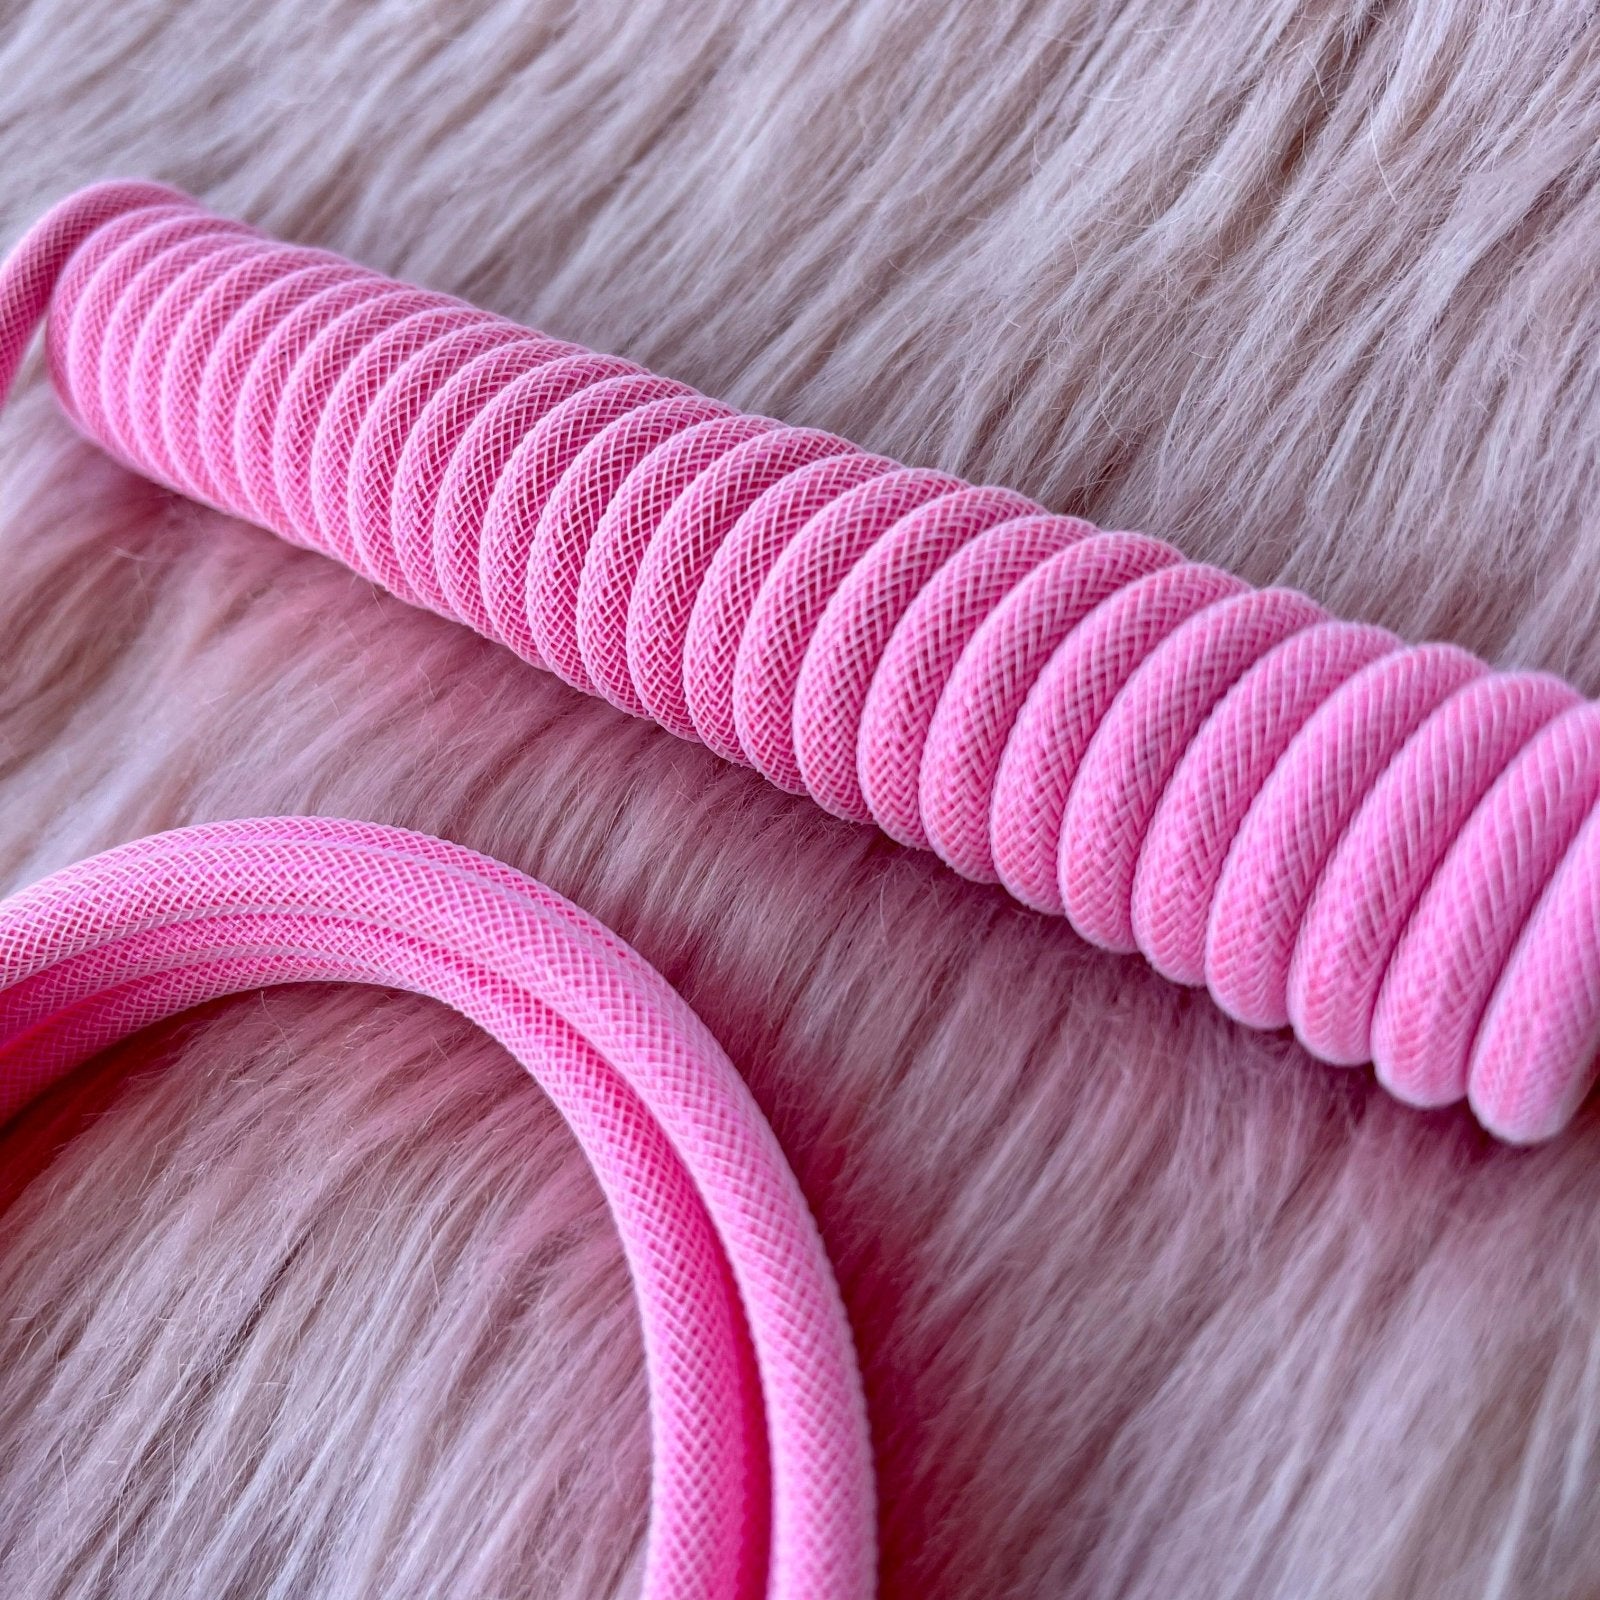 CUSTOM COILED CABLE GX16 -Just Pink - CLS Tech | CLS Tech